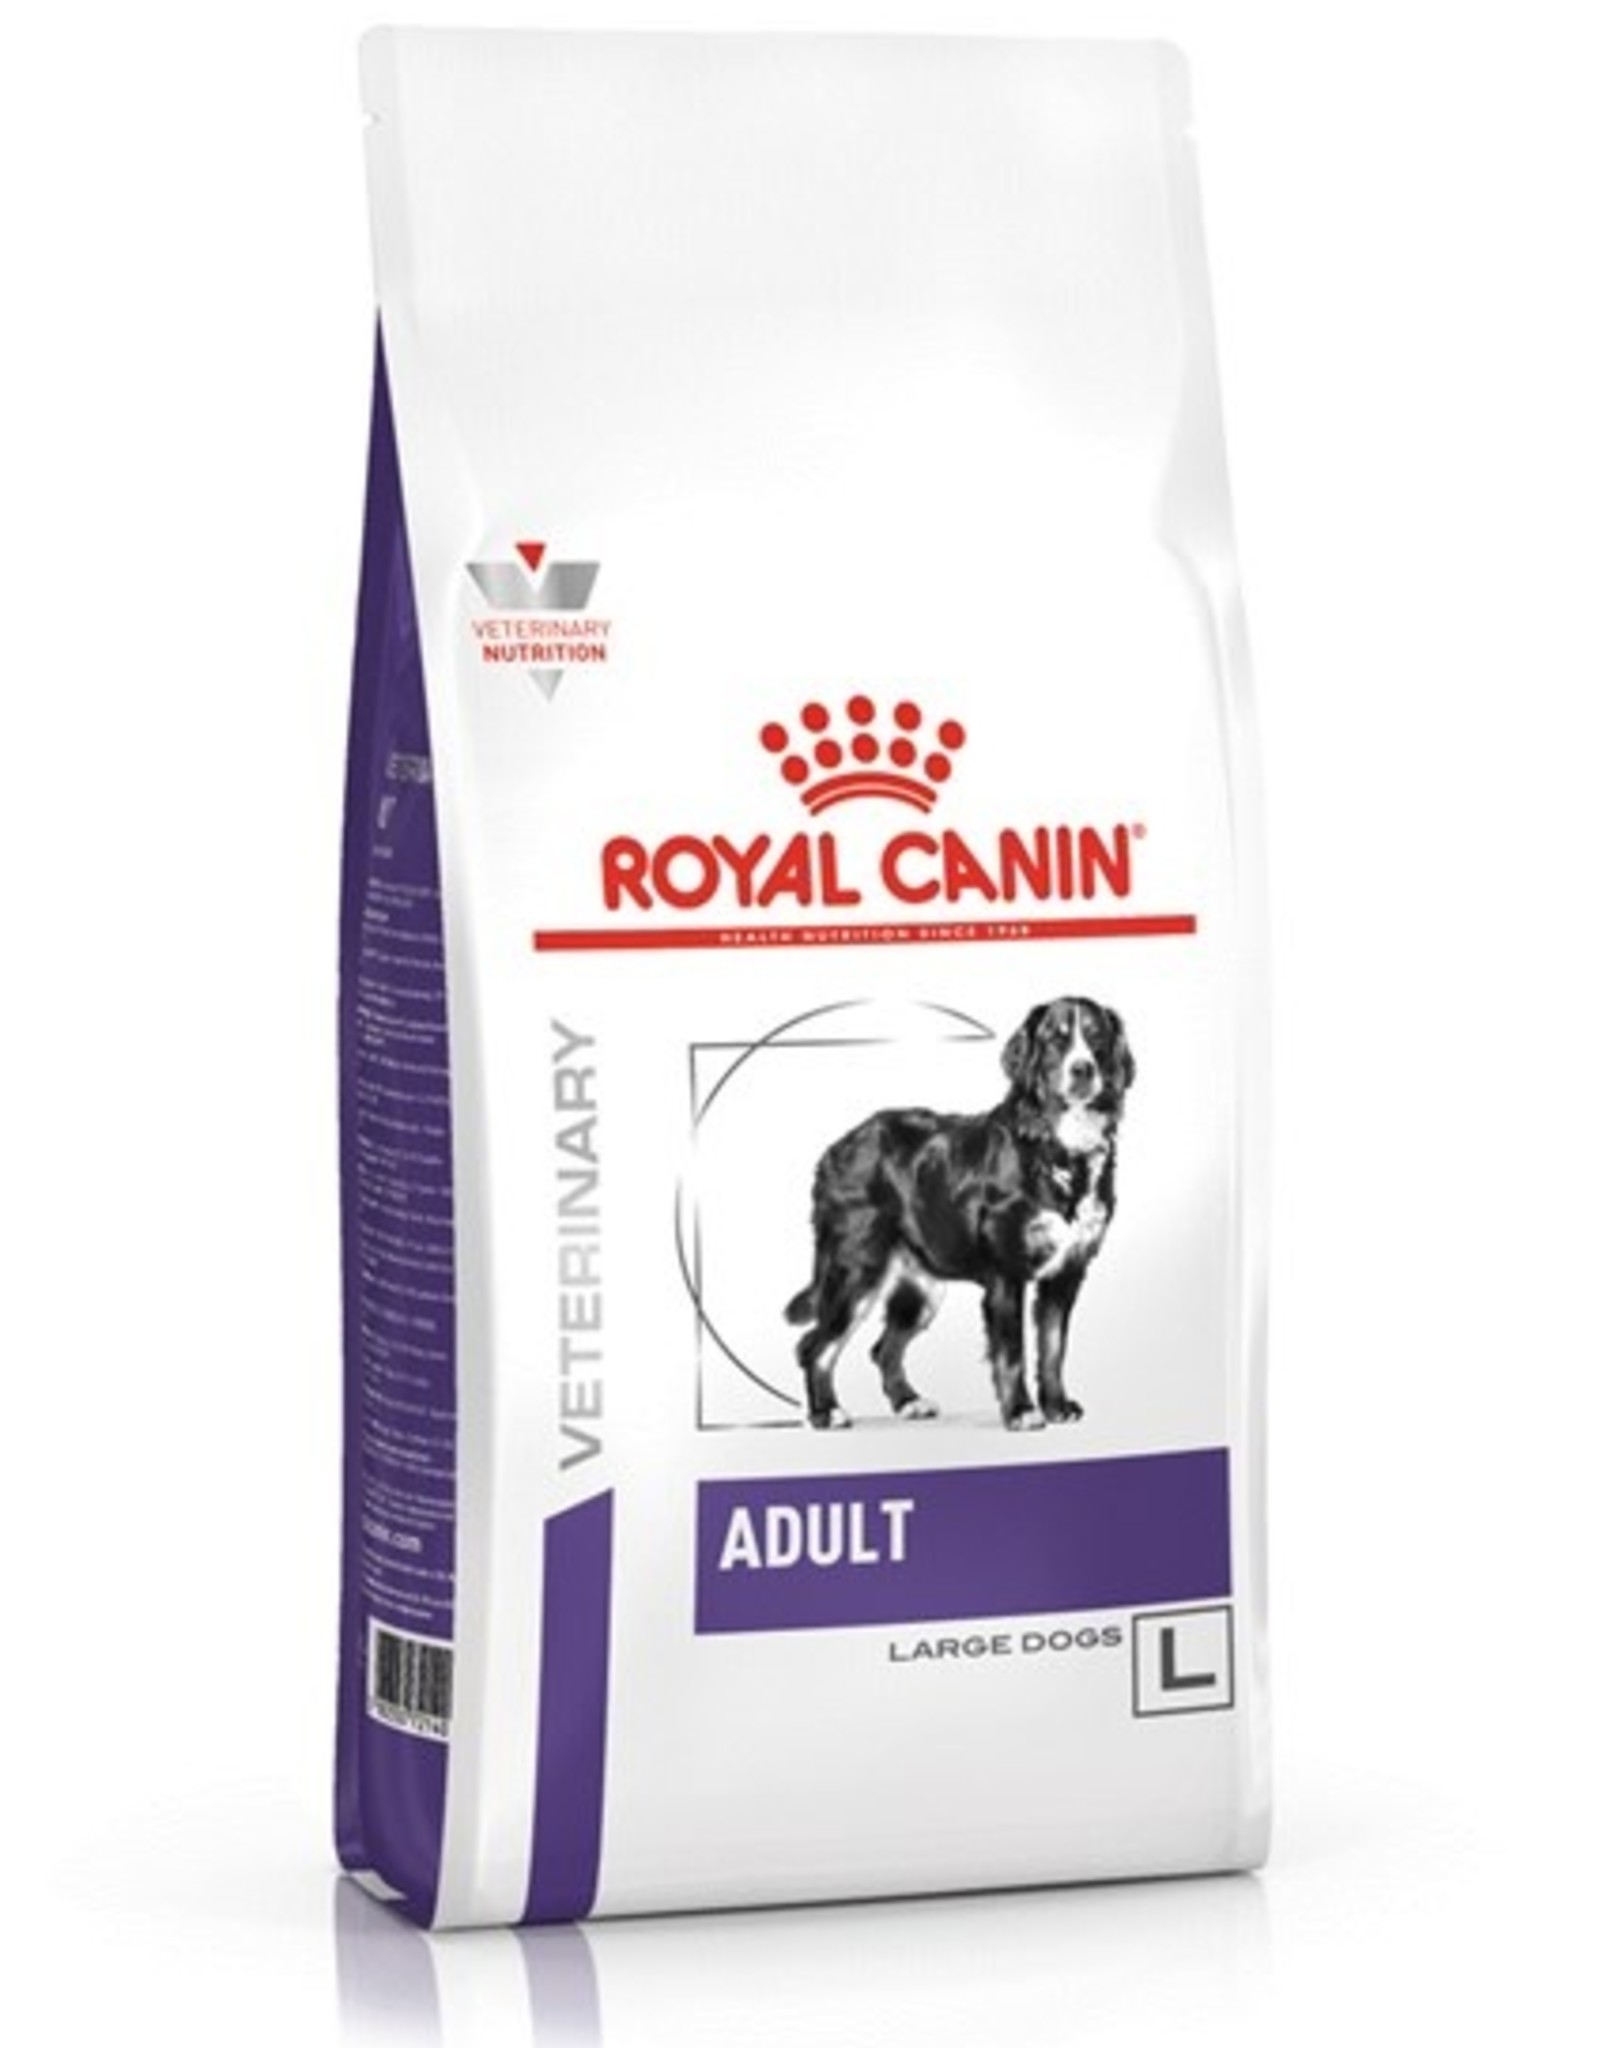 Royal Canin Royal Canin Adult Large Osteo Digest Hond 4kg